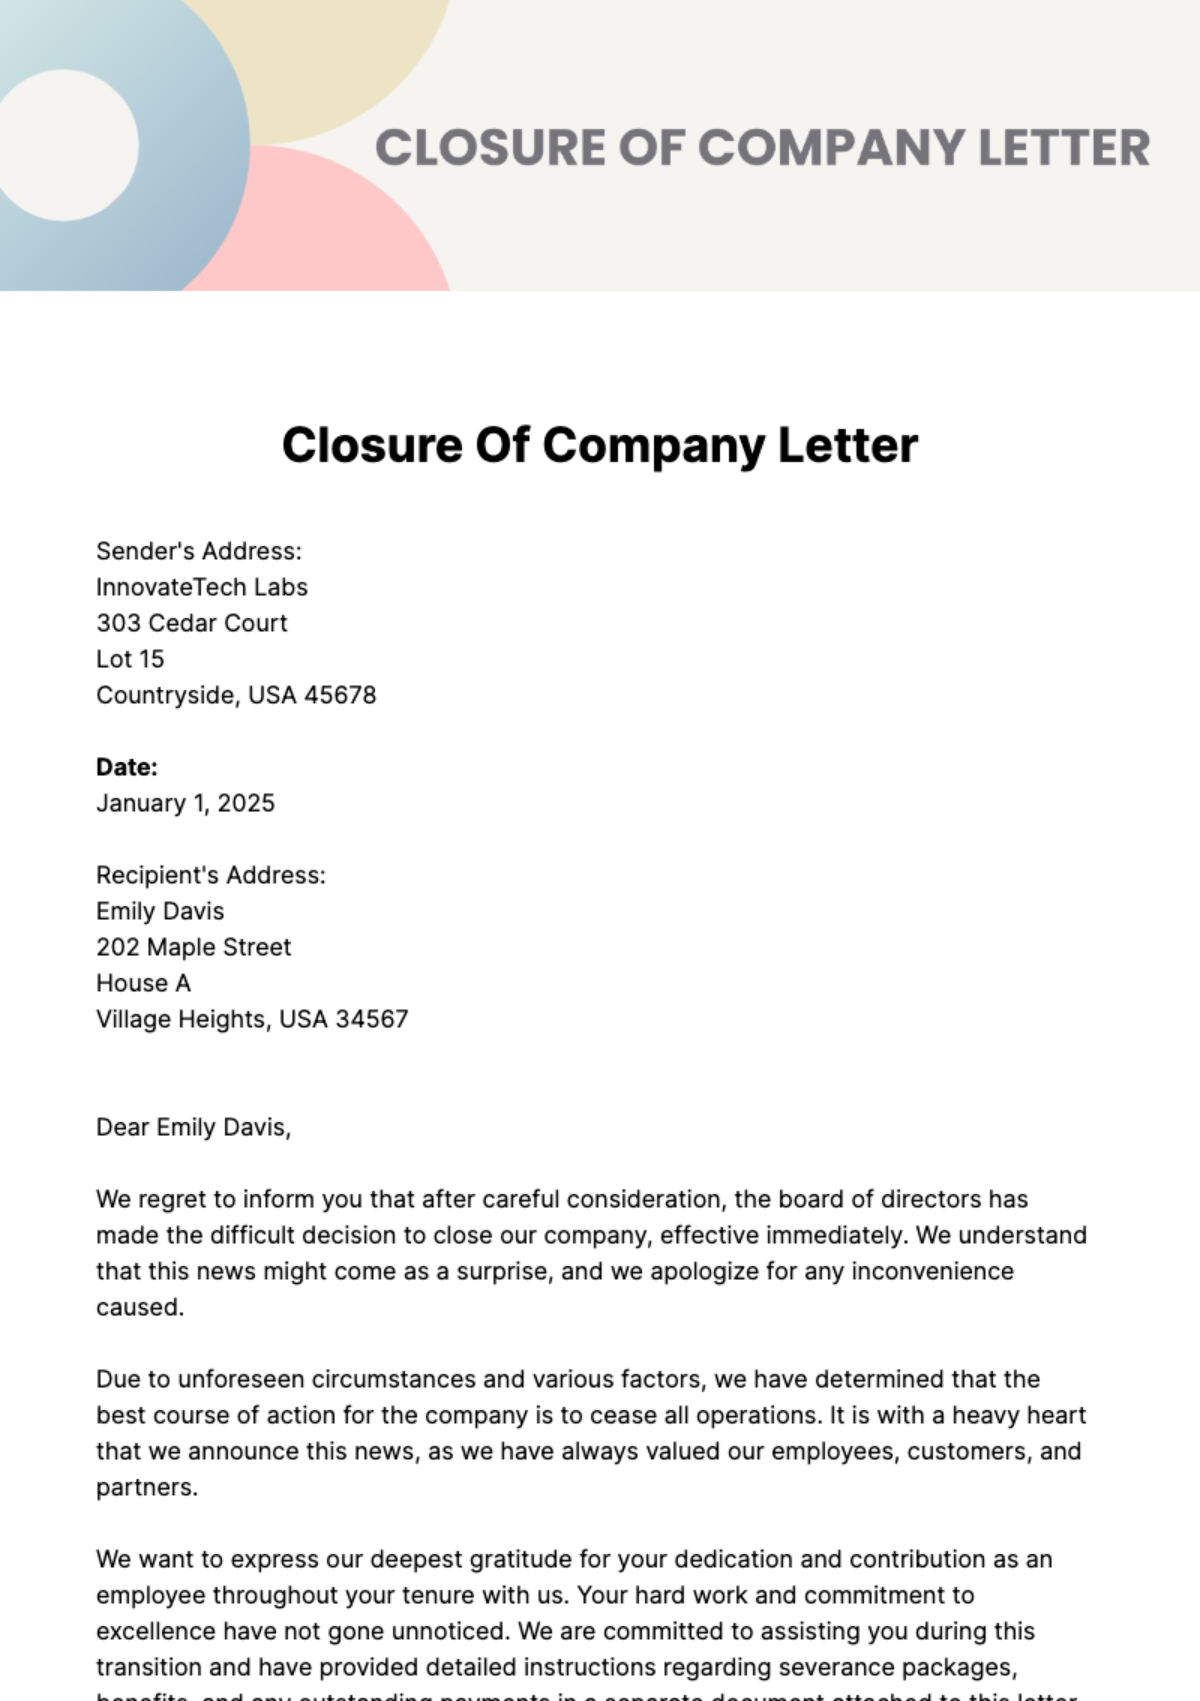 Free Closure Of Company Letter Template